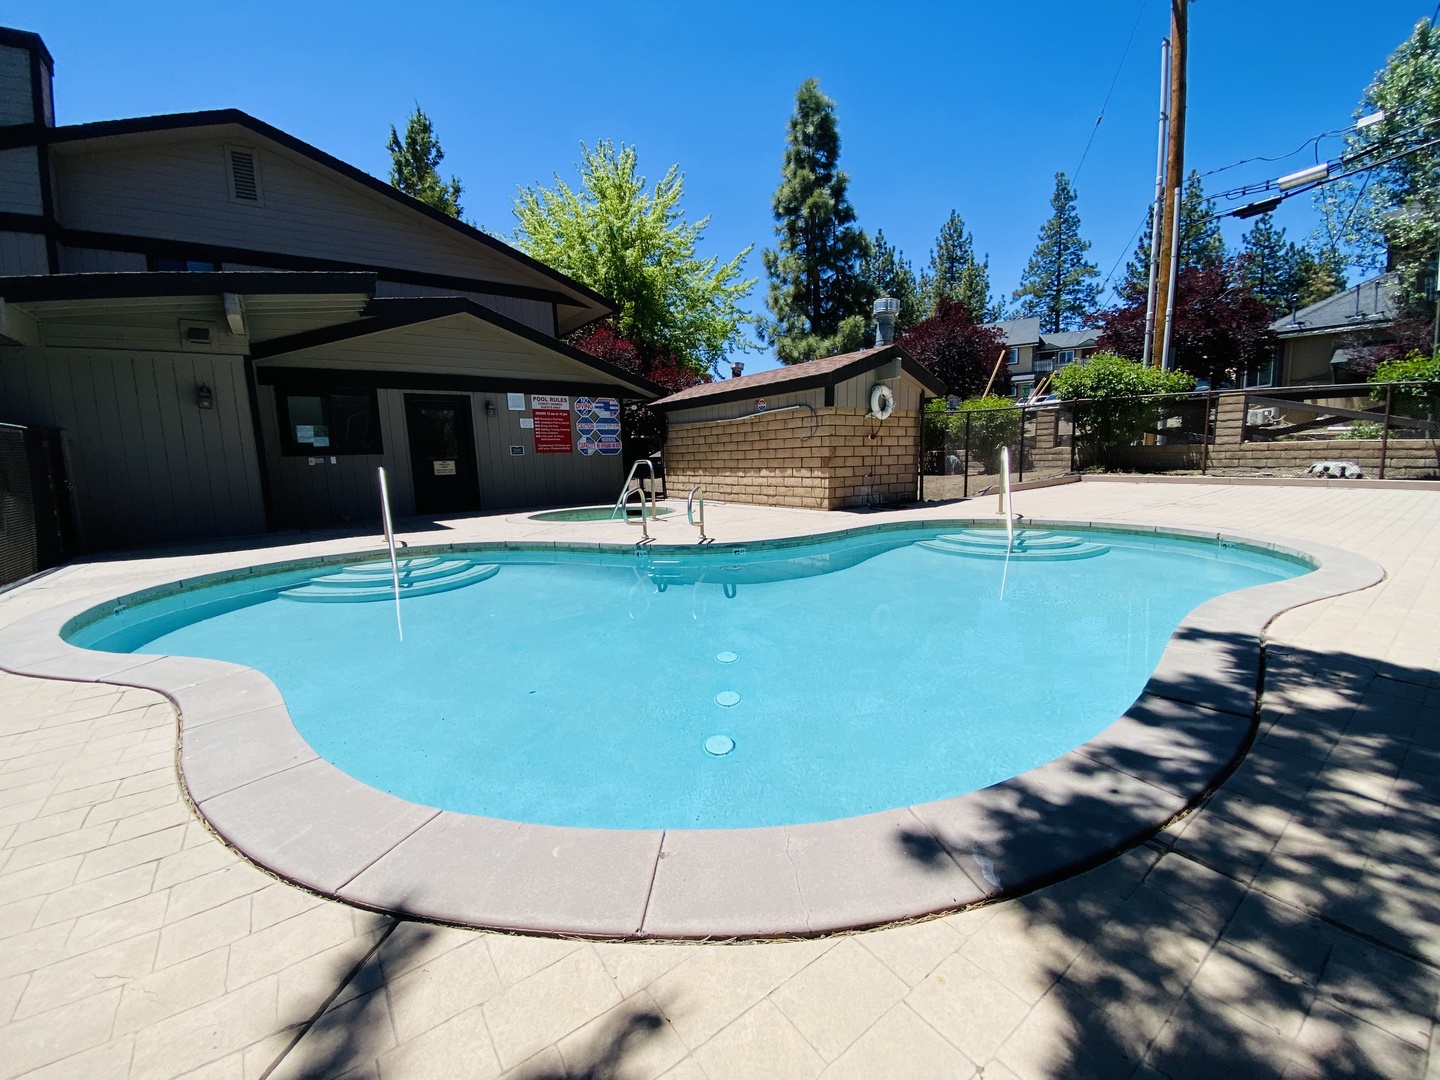 Shared pool and spa at the community